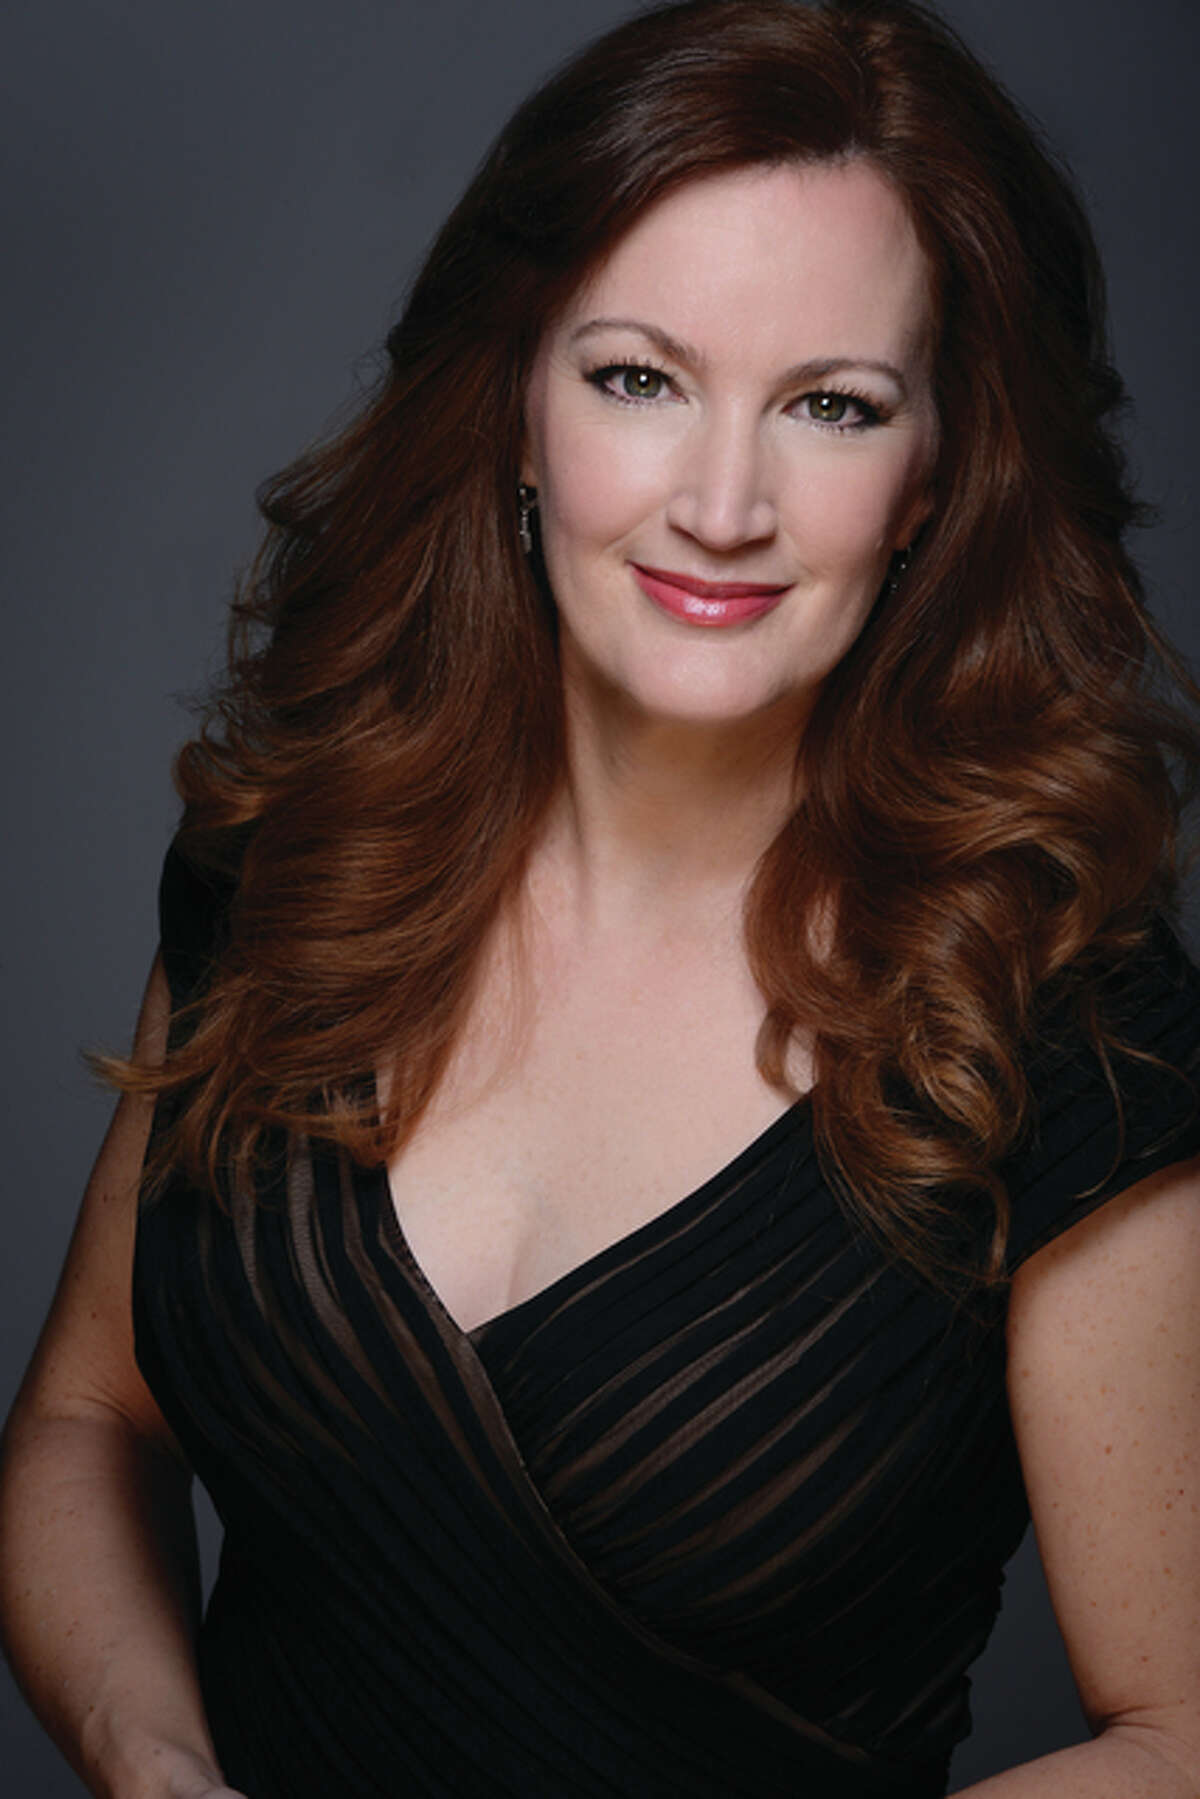 Soprano Emily Truckenbrod will appear as a featured soloist in the upcoming Great Rivers Choral Society Handel’s Messiah concert.